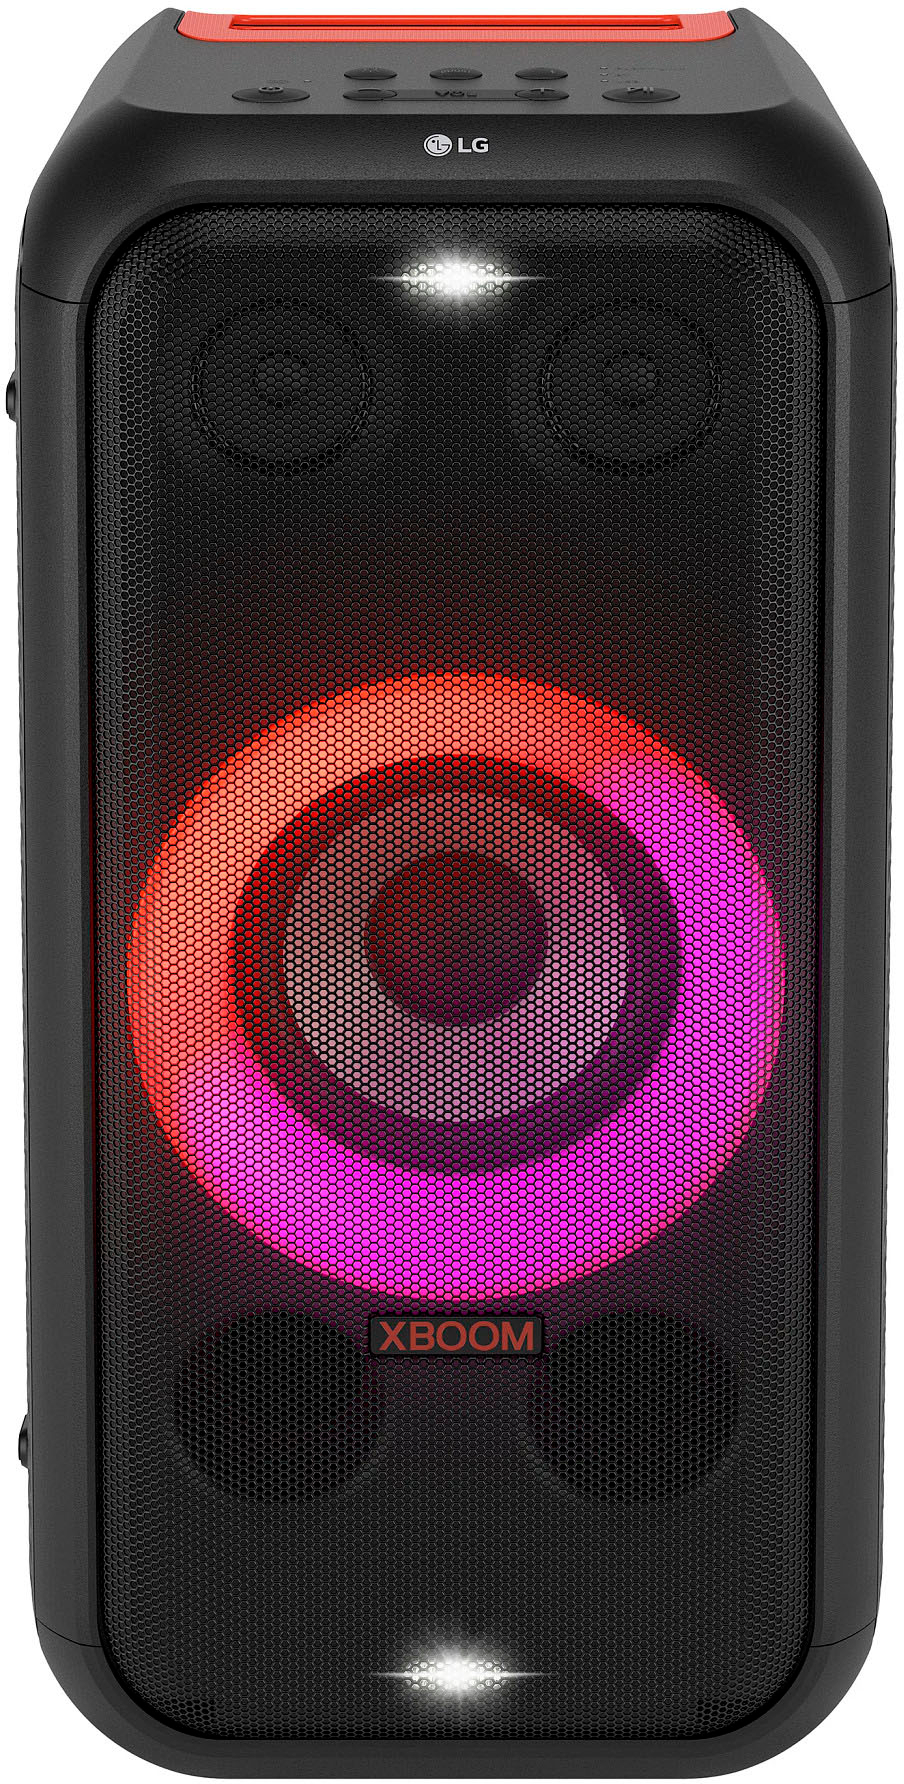 LG XBOOM XL5 Portable Tower Party Speaker with LED Lighting Black XL5S -  Best Buy